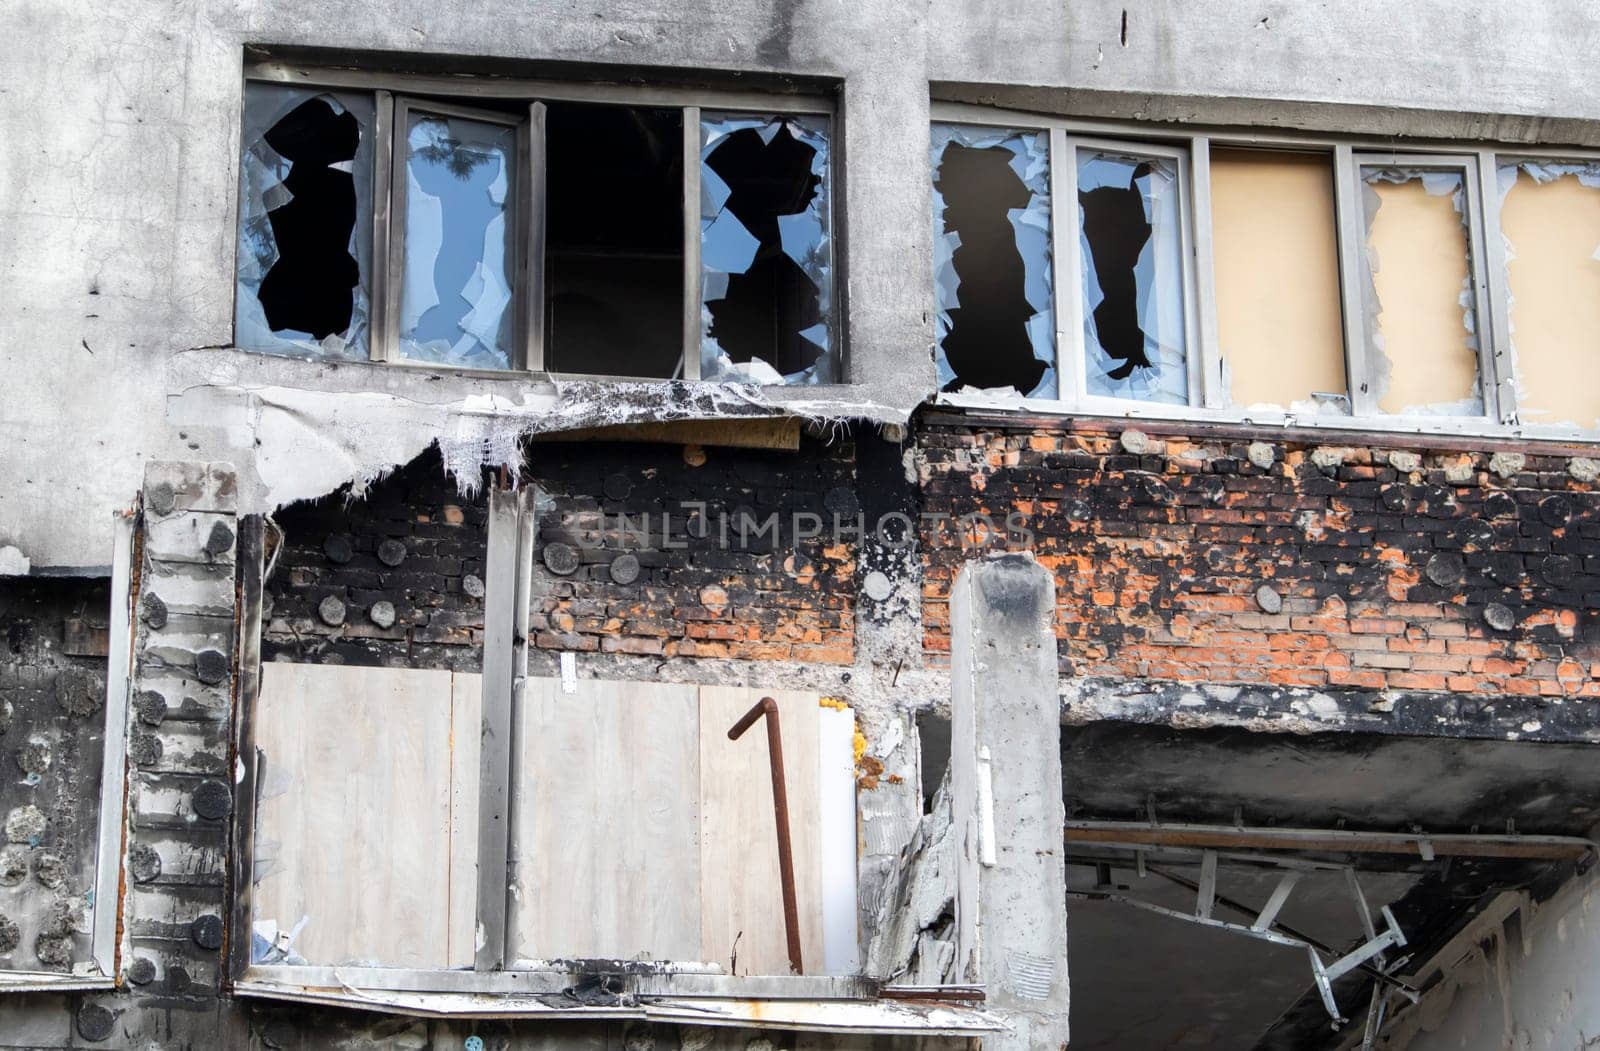 Residential buildings, windows and balconies were damaged by the blast and shrapnel from artillery shelling. The destruction of the city by military operations, the consequences of the war